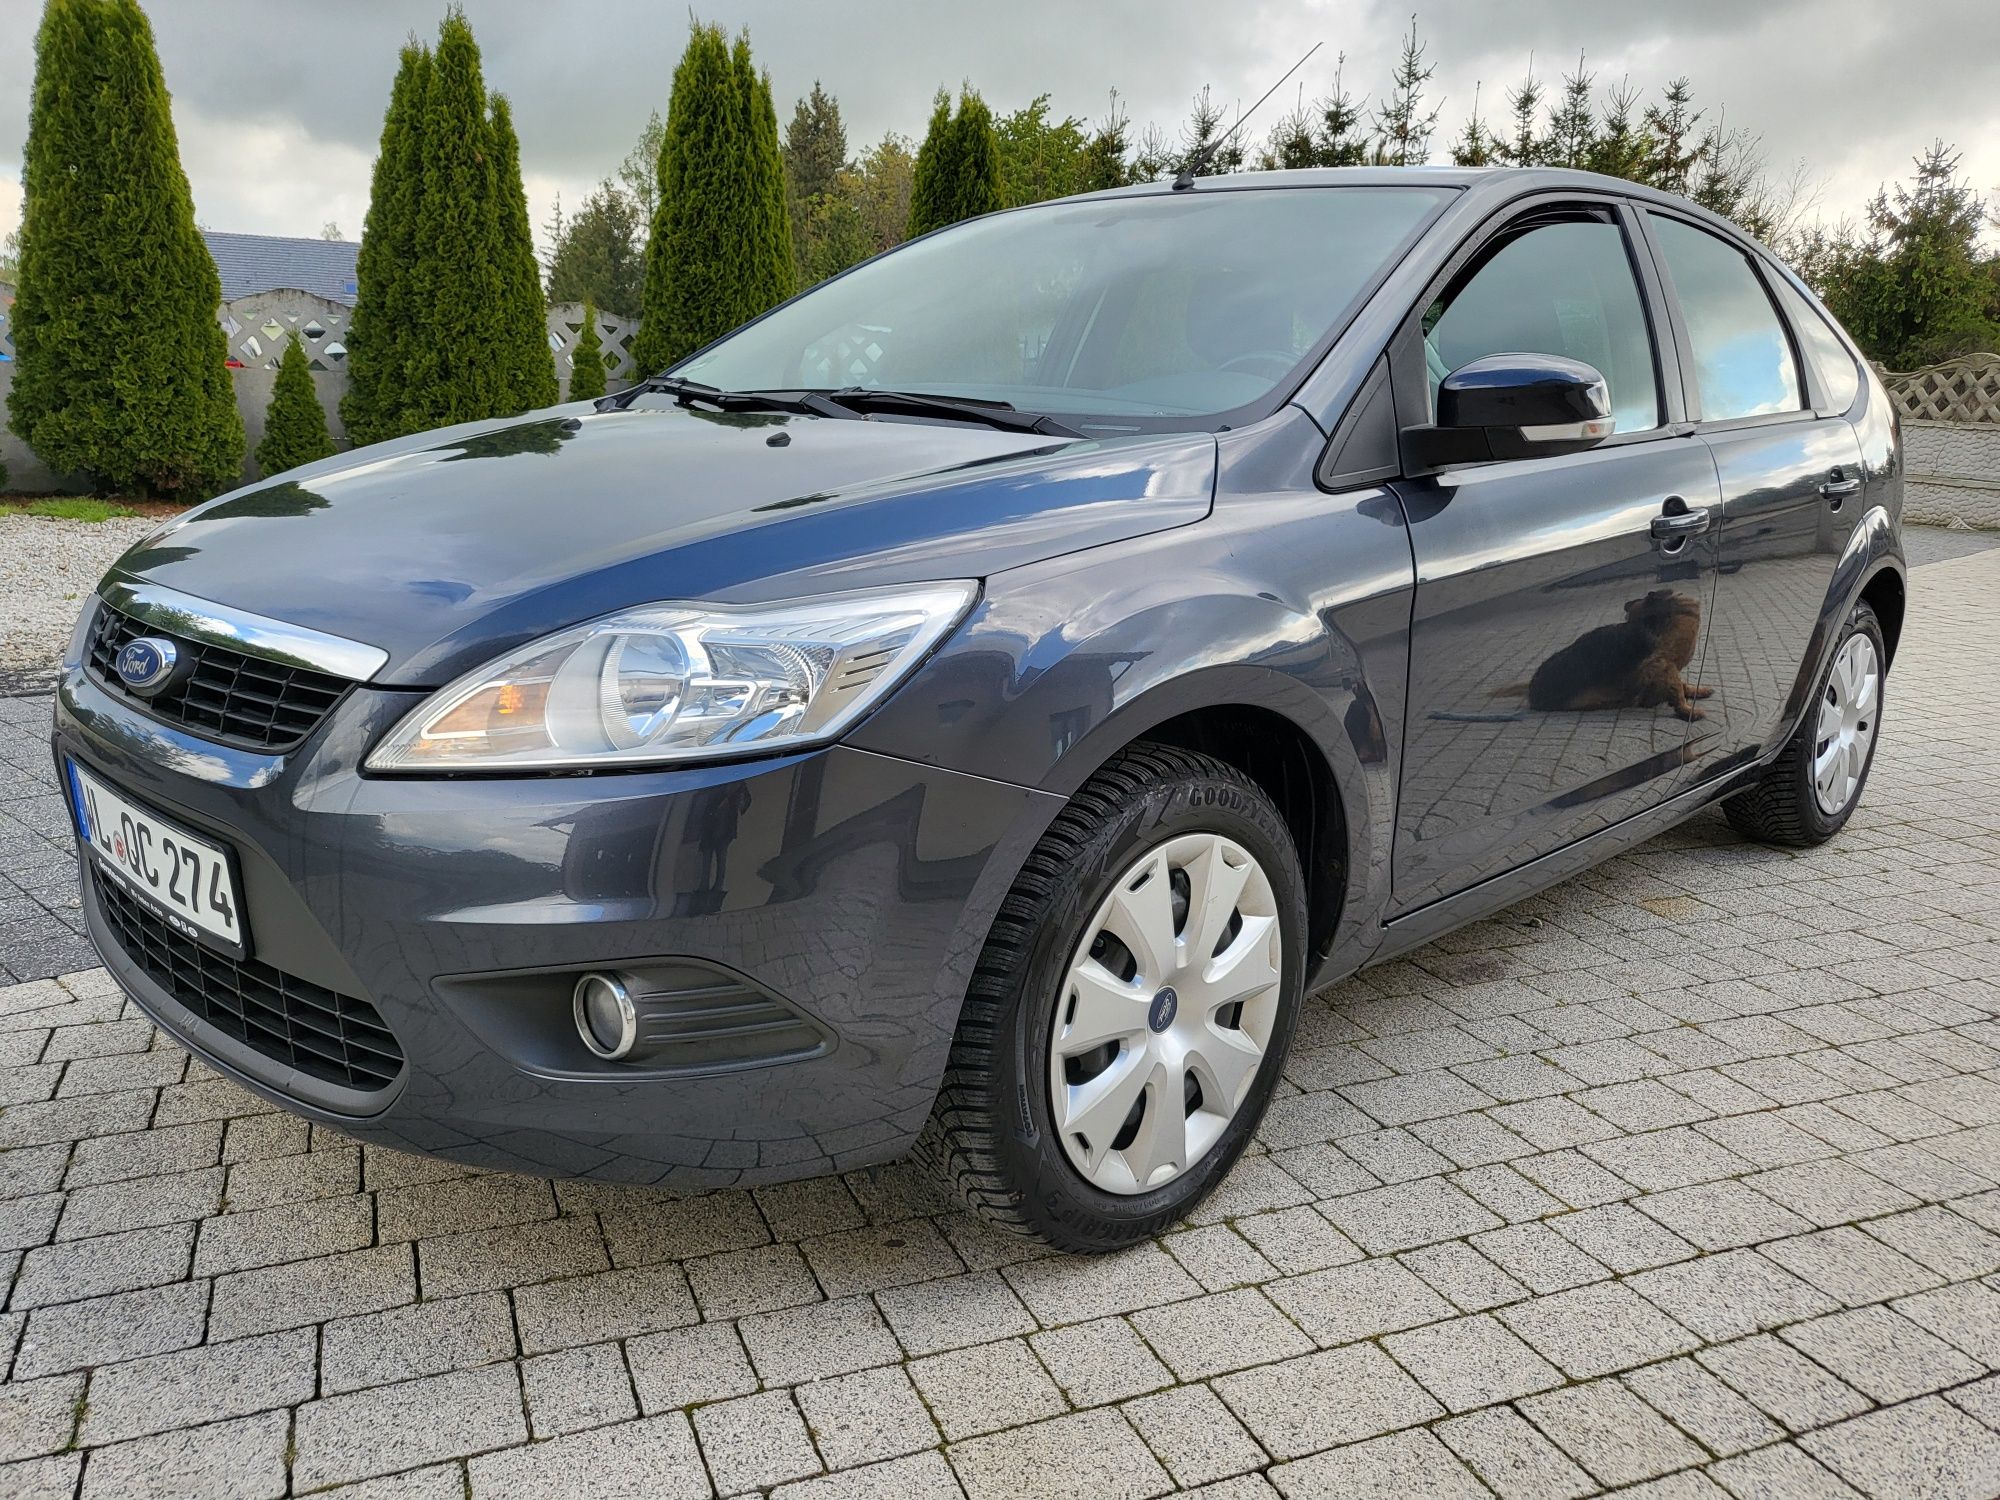 Ford Focus 1.8 Benzyna Hatchback Lift Opłacony